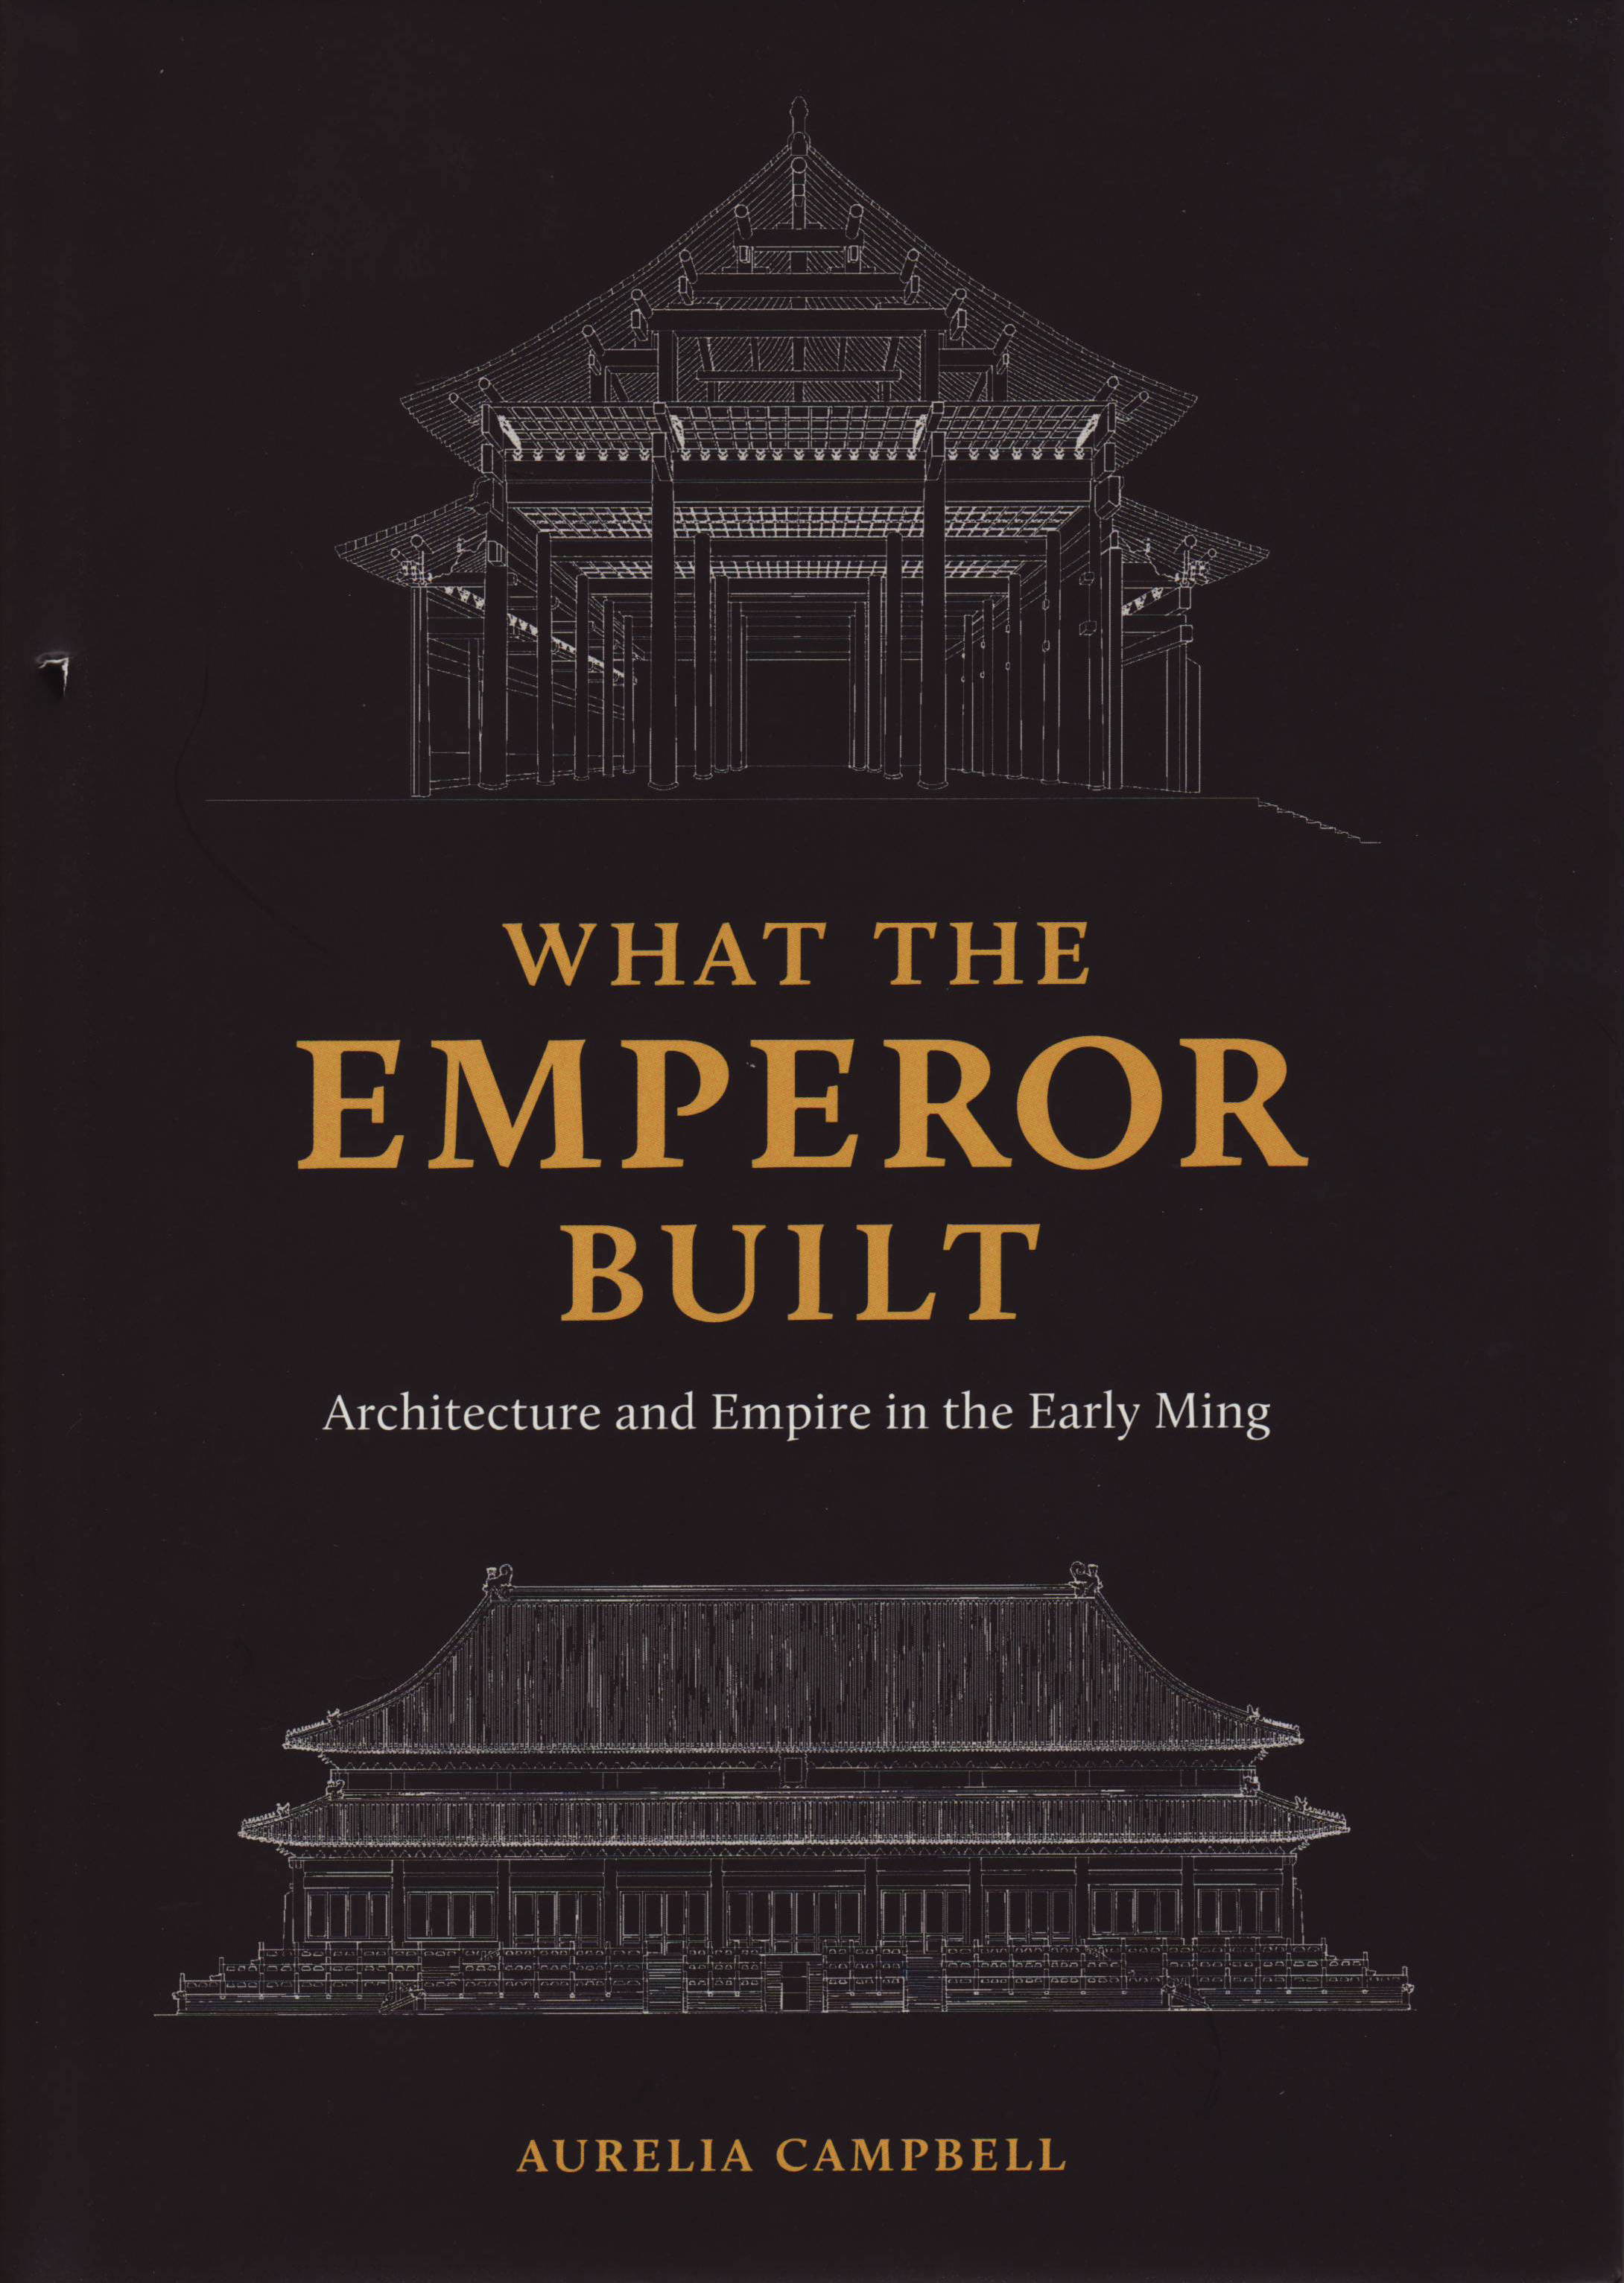 book cover: Aurelia Campbell: That the emperor built. Architecture and Empire in the Early Ming (2020)